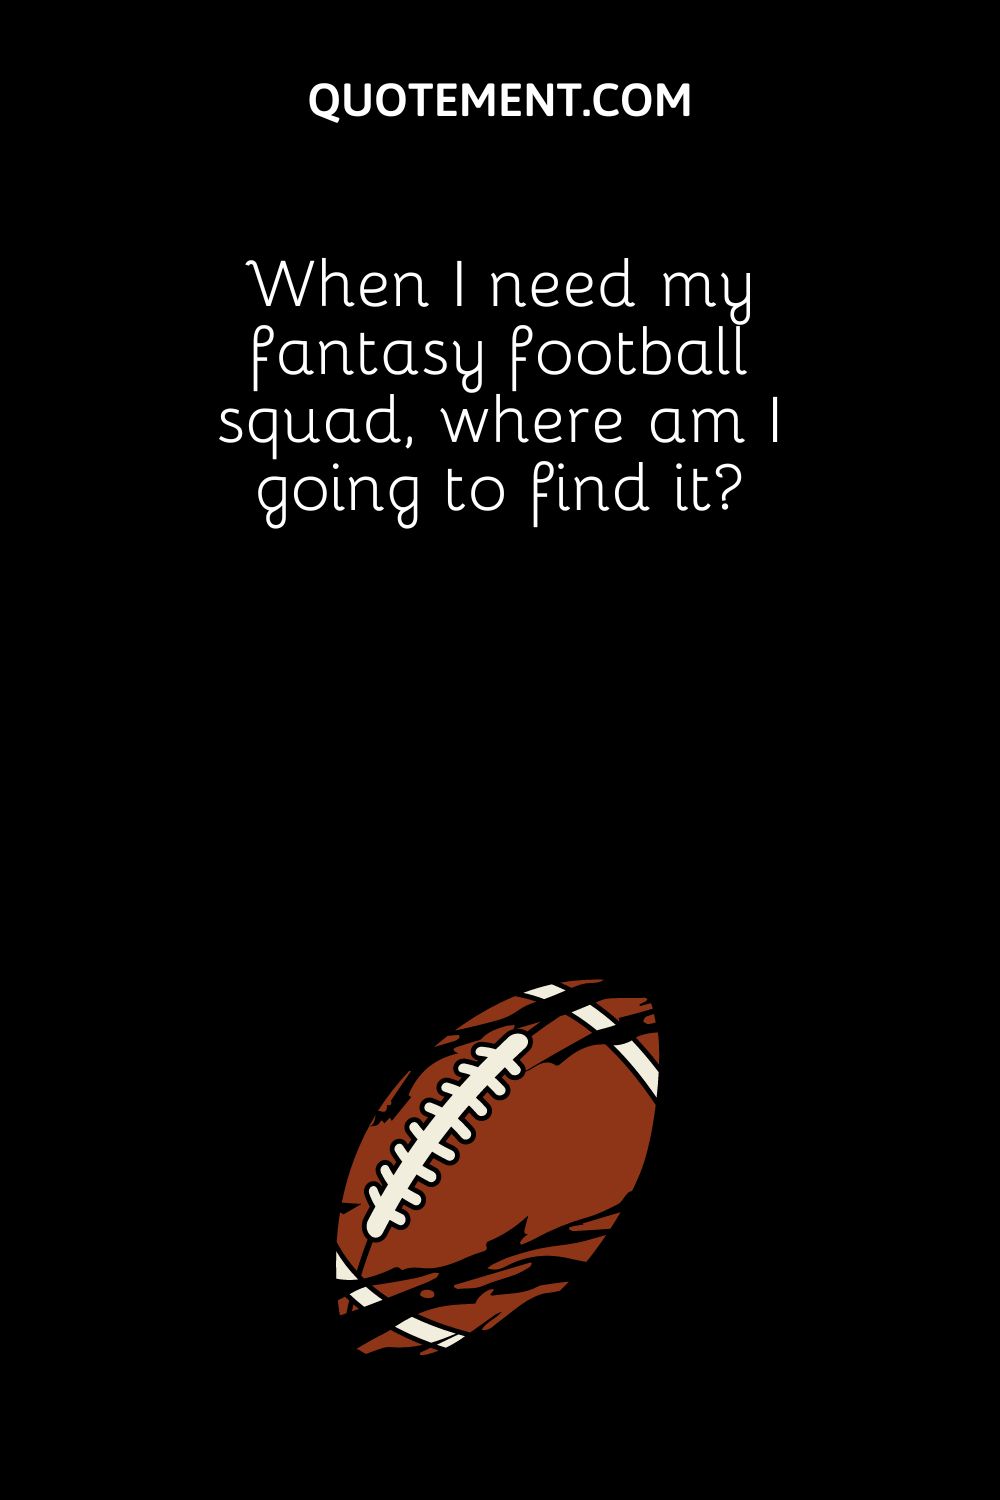 When I need my fantasy football squad, where am I going to find it